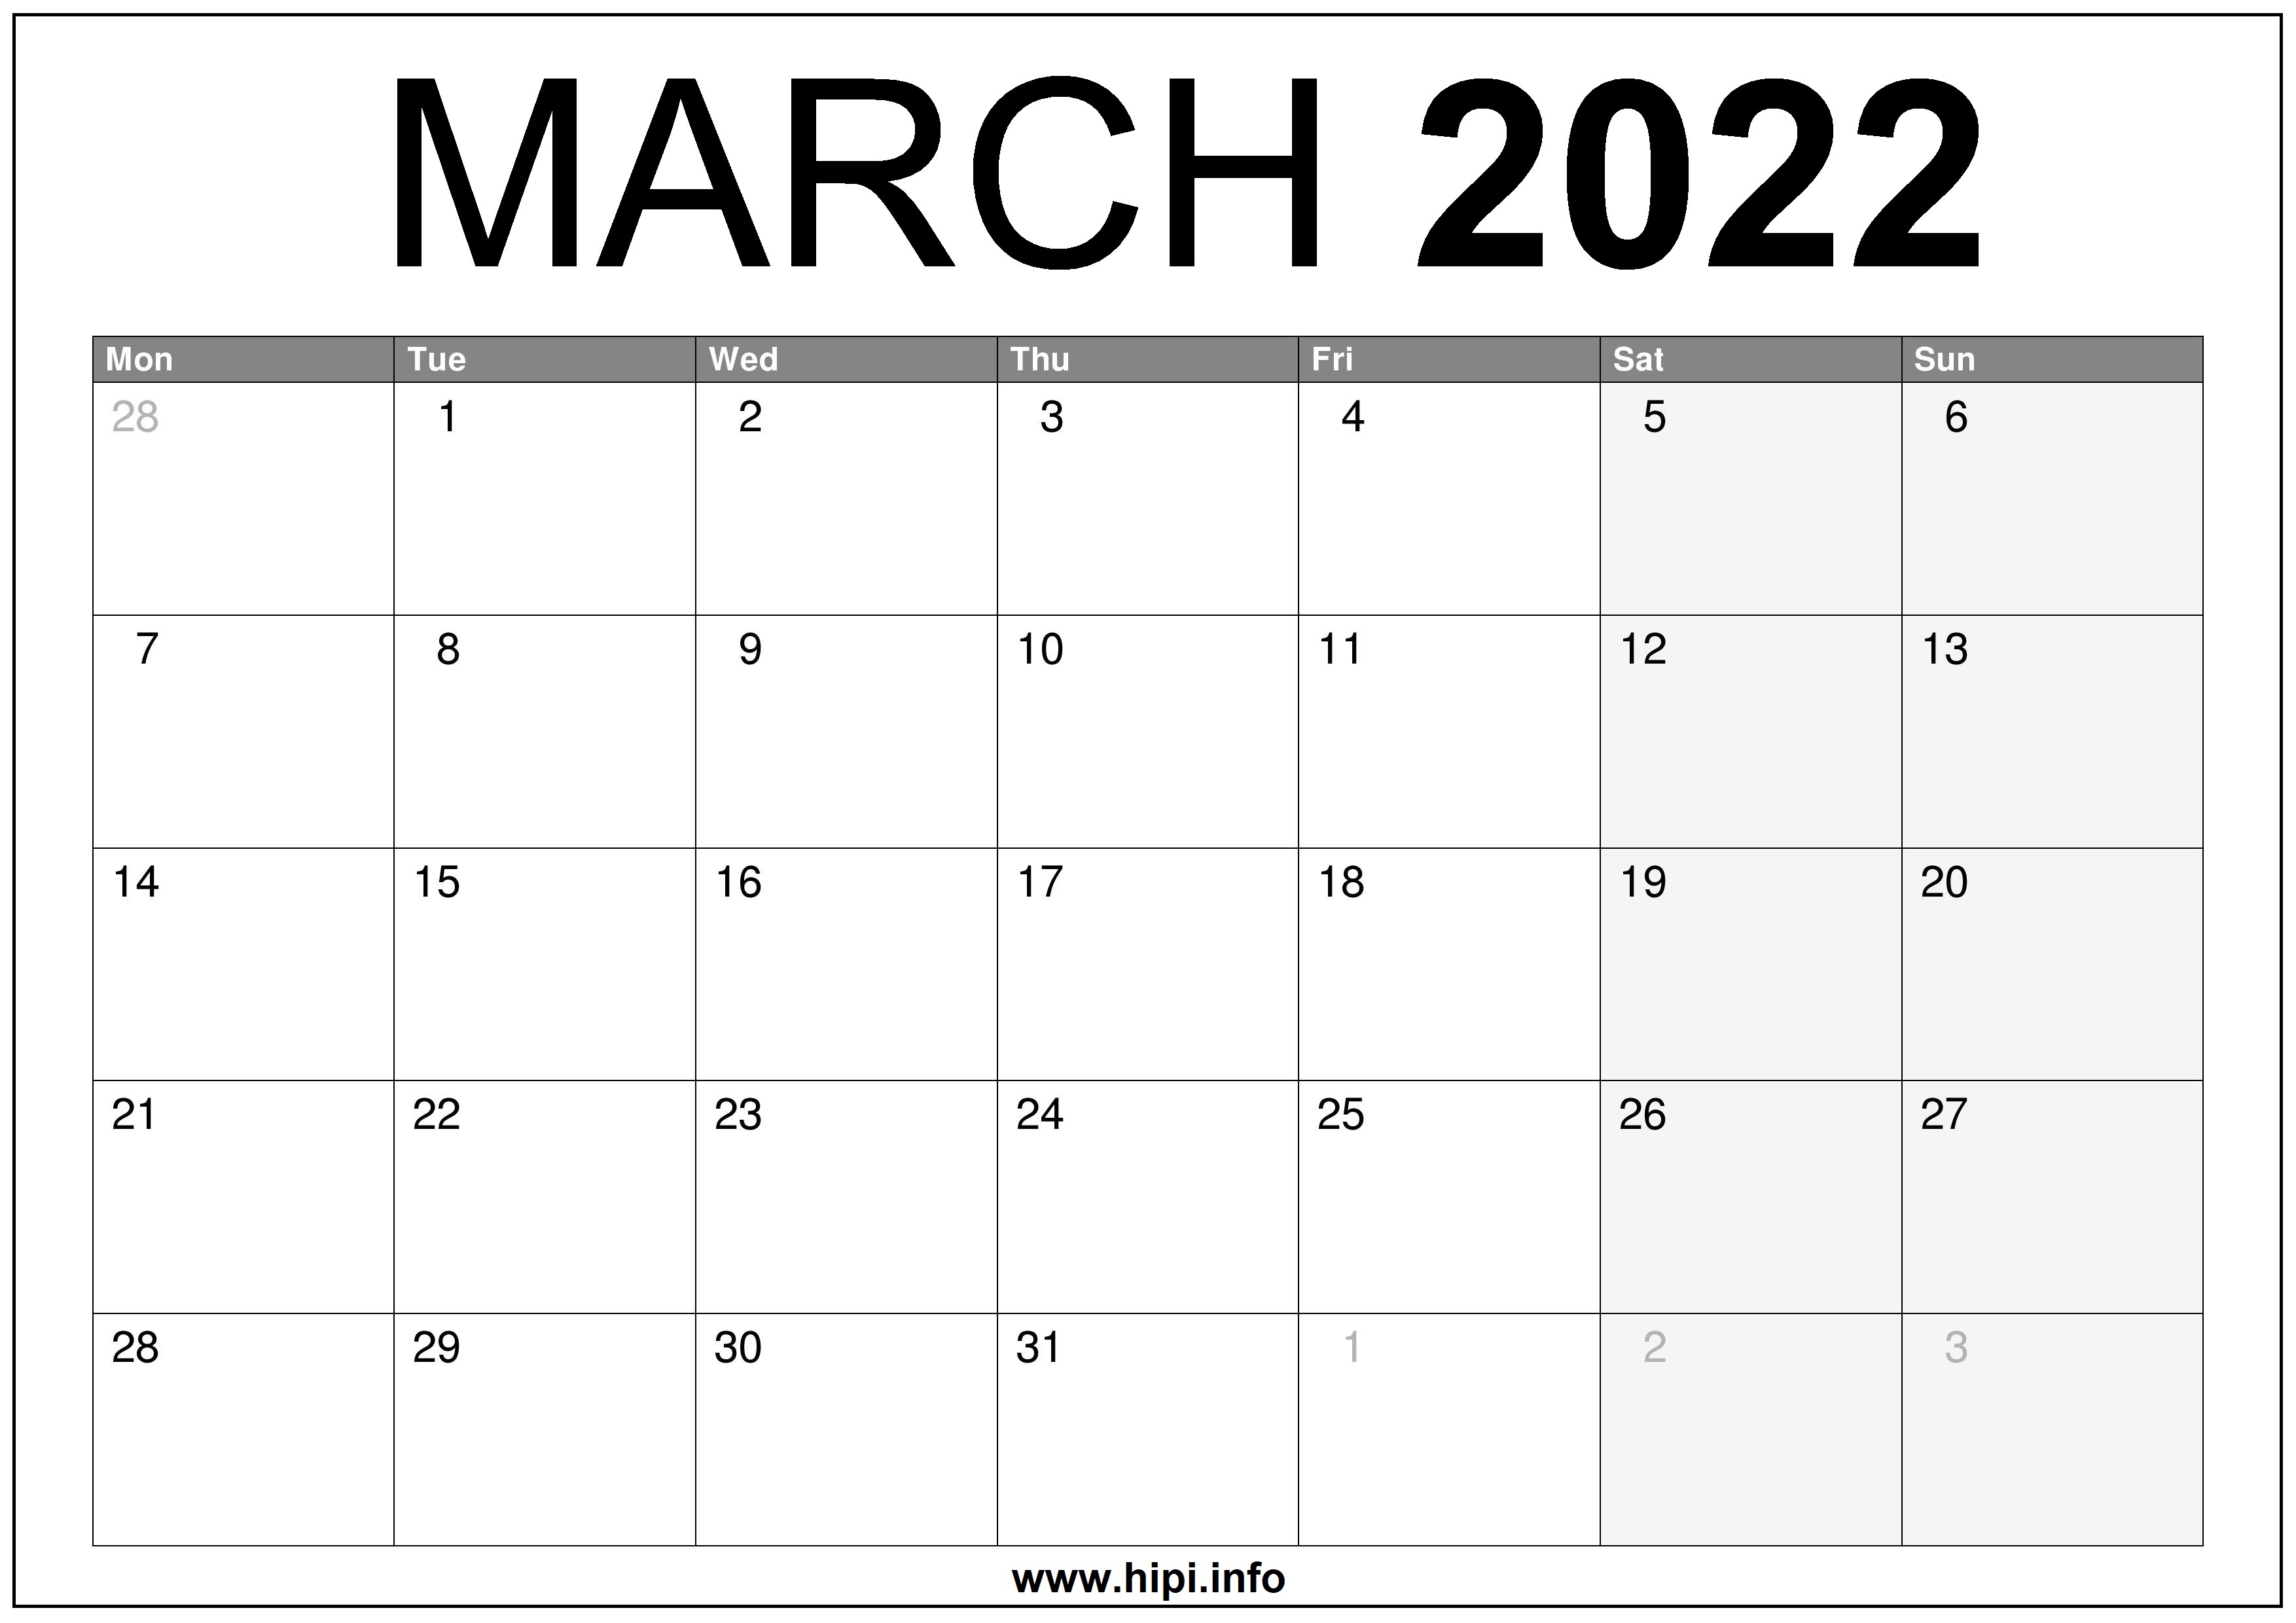 monthly calendar march 2022